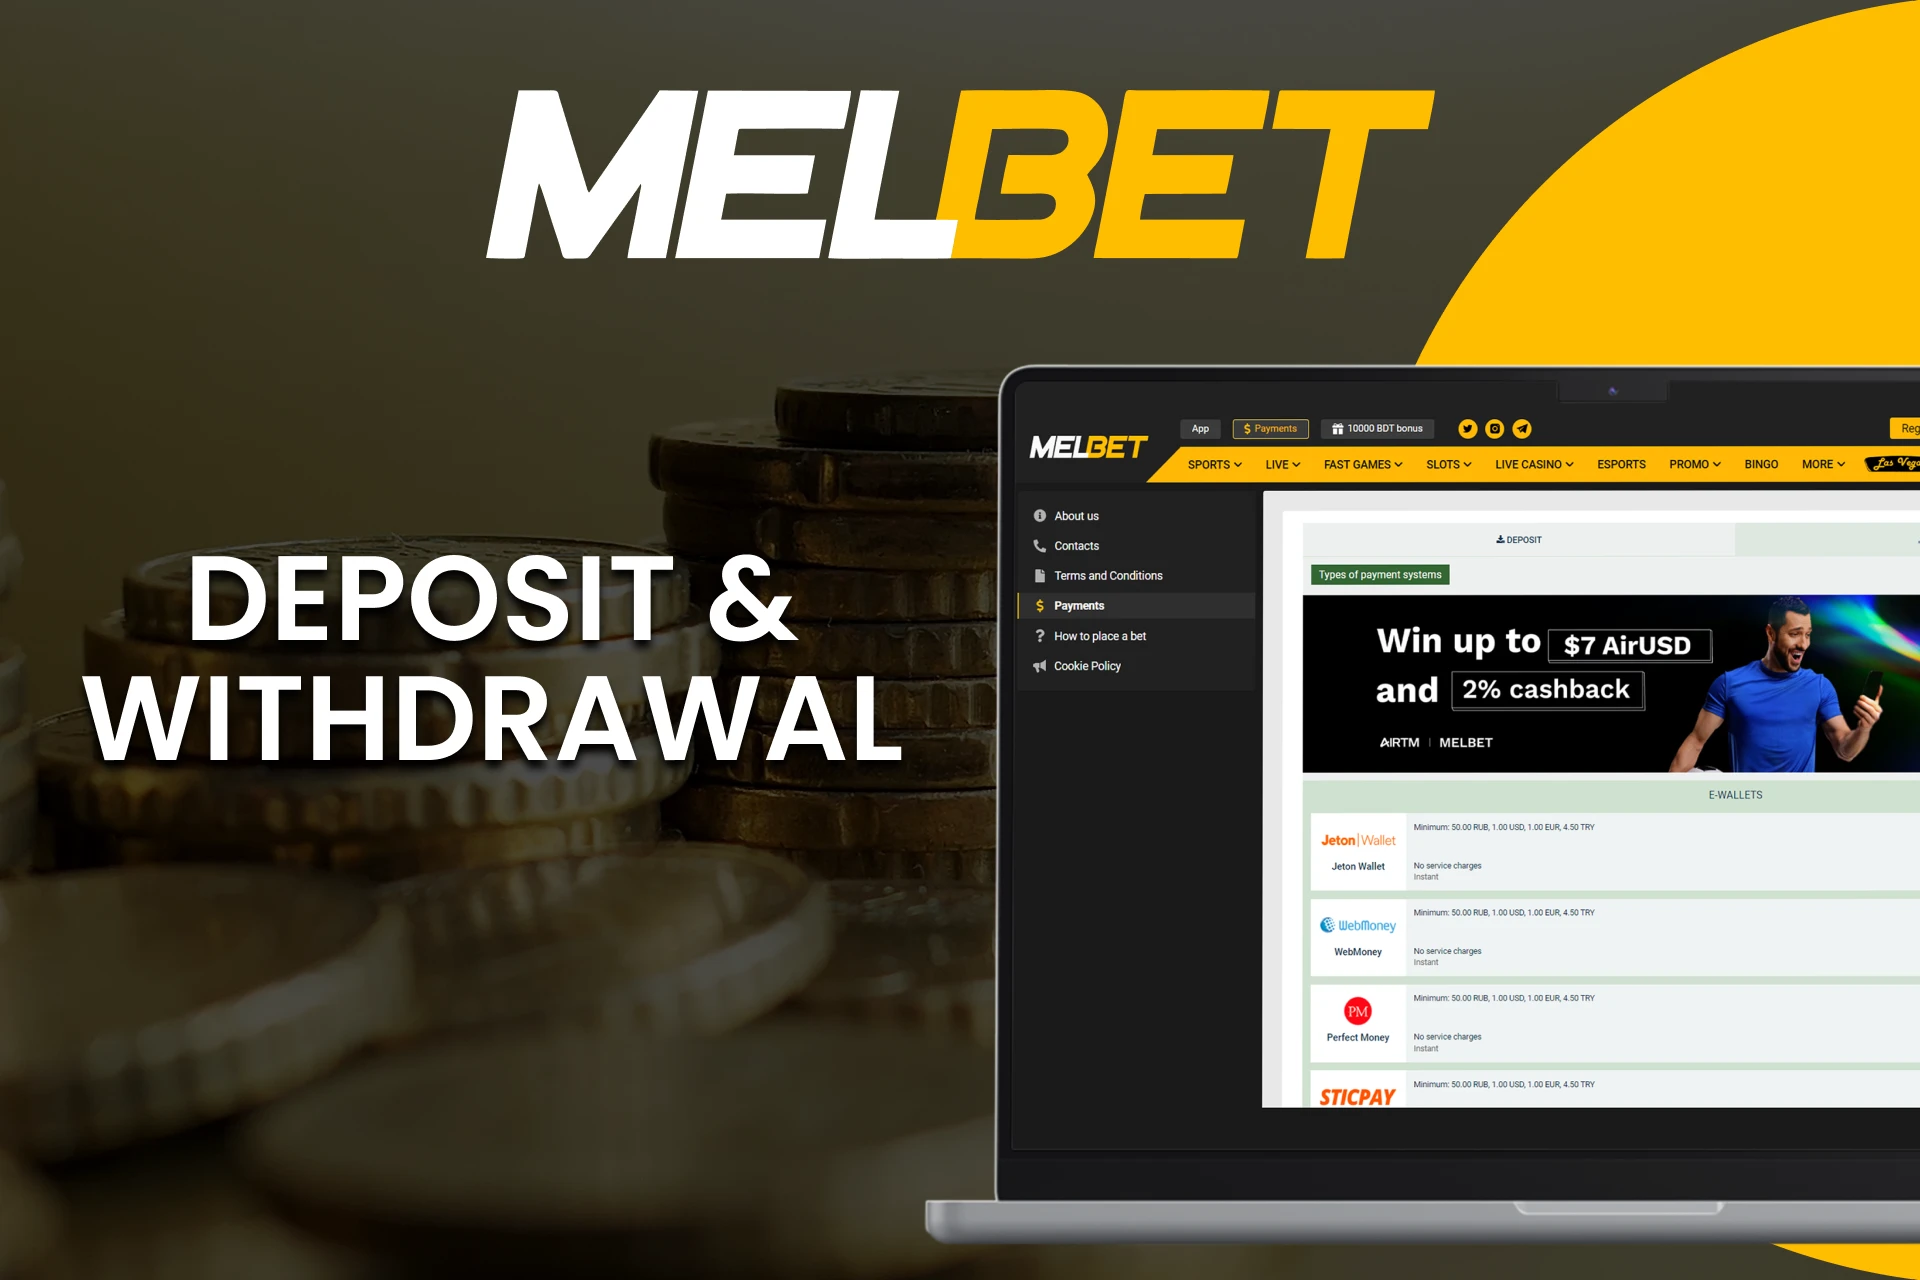 Find out about Melbet's transaction methods.